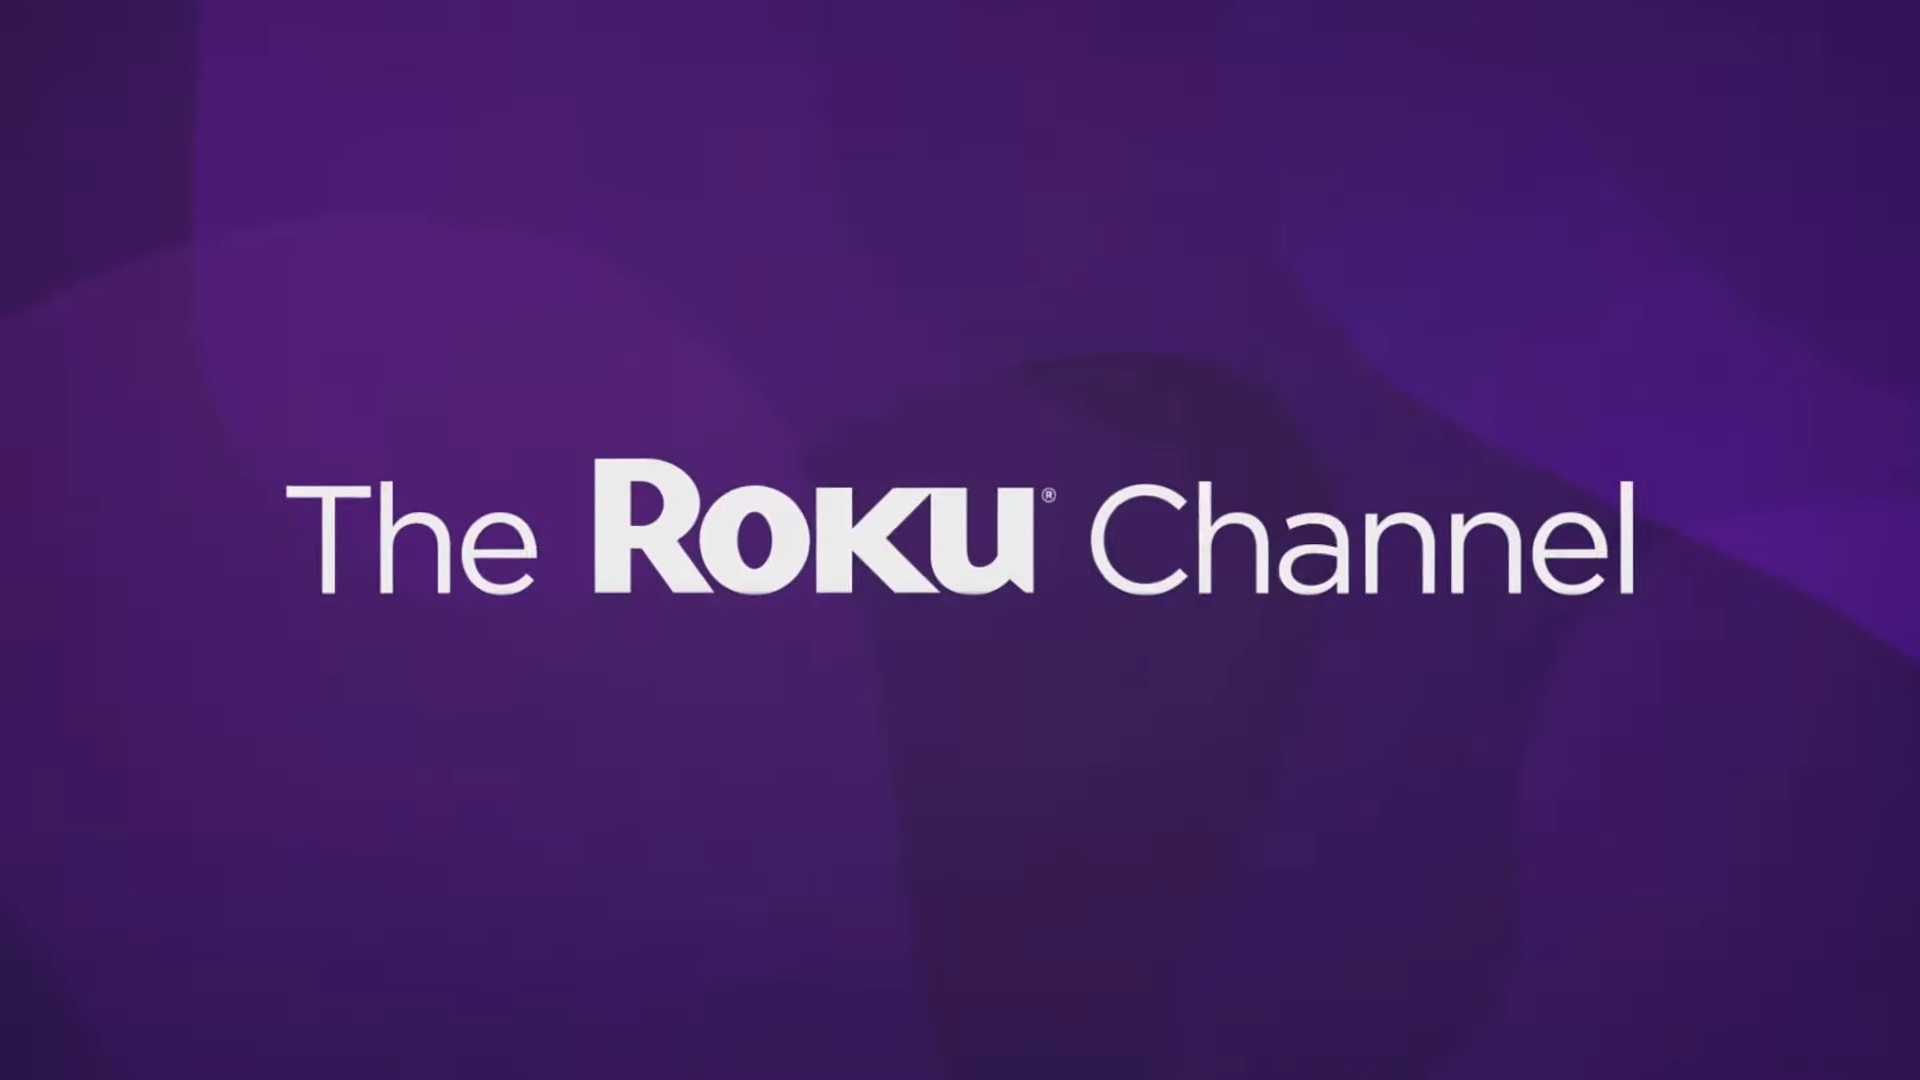 The Roku Channel is adding 22 free movies in July